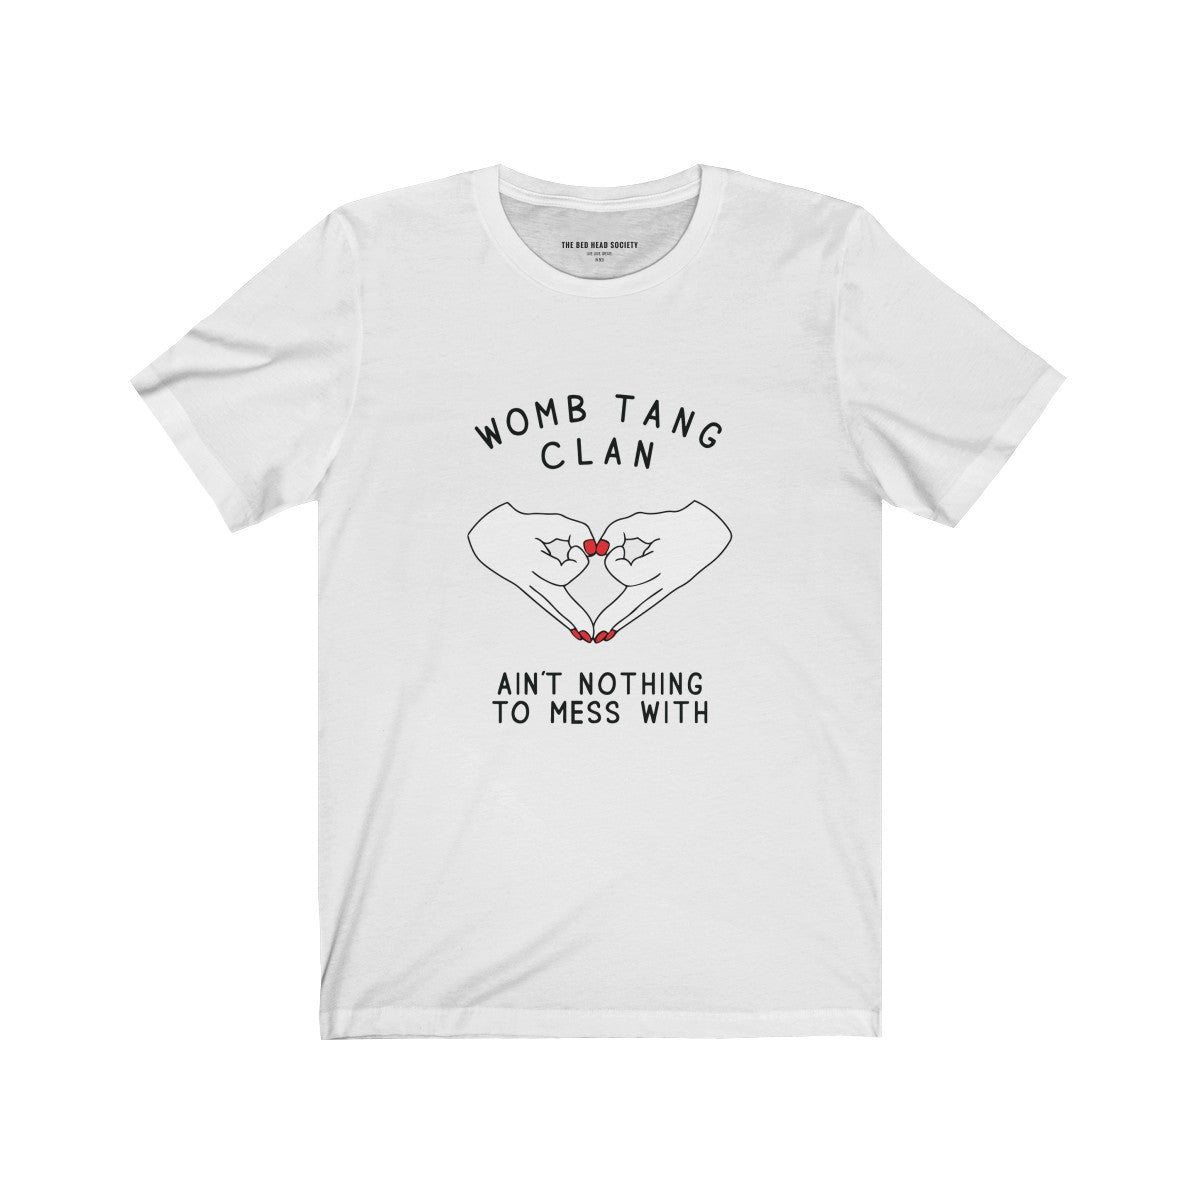 Womb Tang Clan Ain't Nothin to Mess With T-Shirt - Shop Bed Head Society